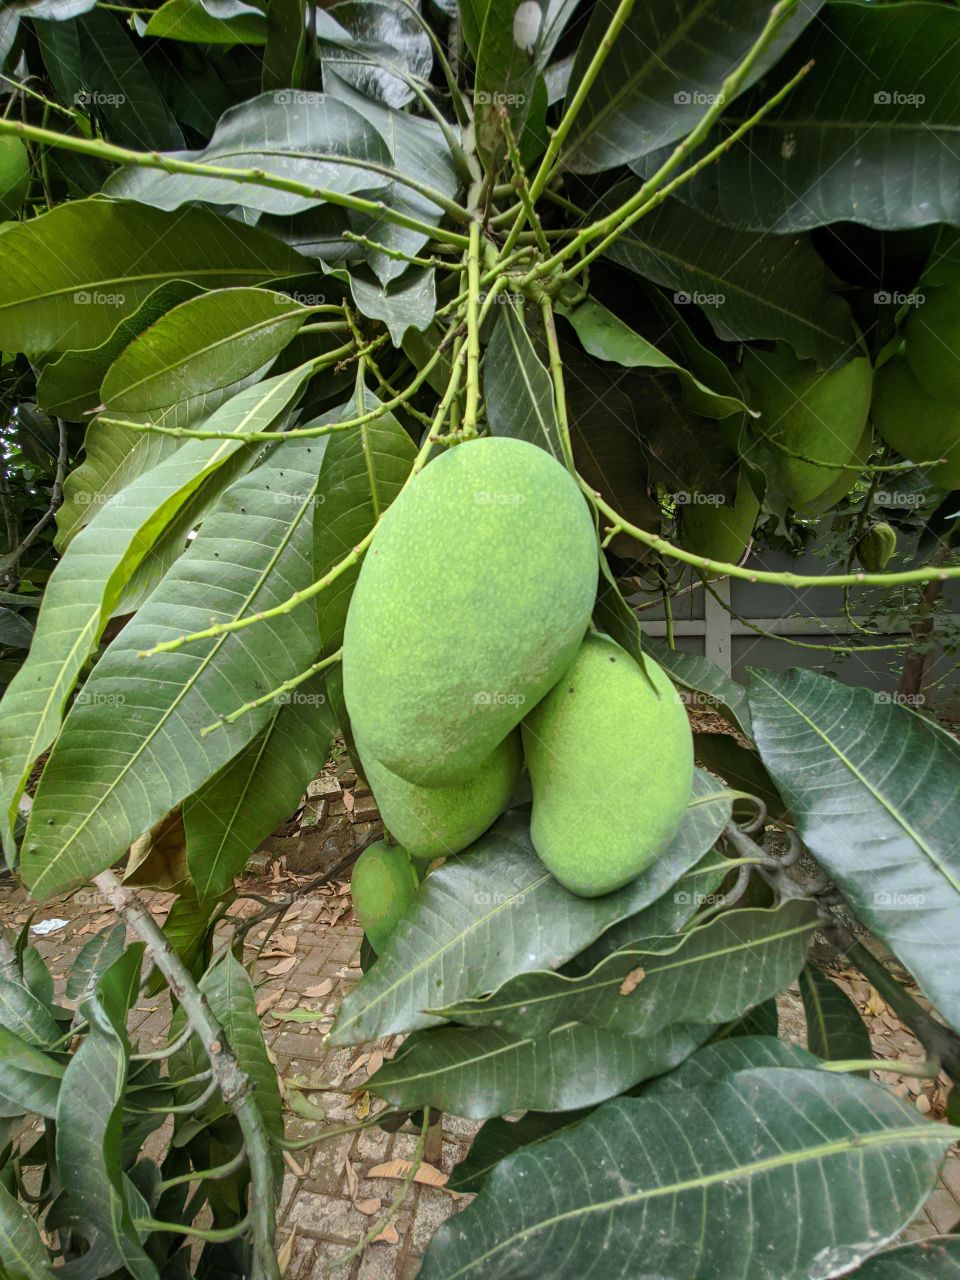 some young mangoes that are still unripe fresh green